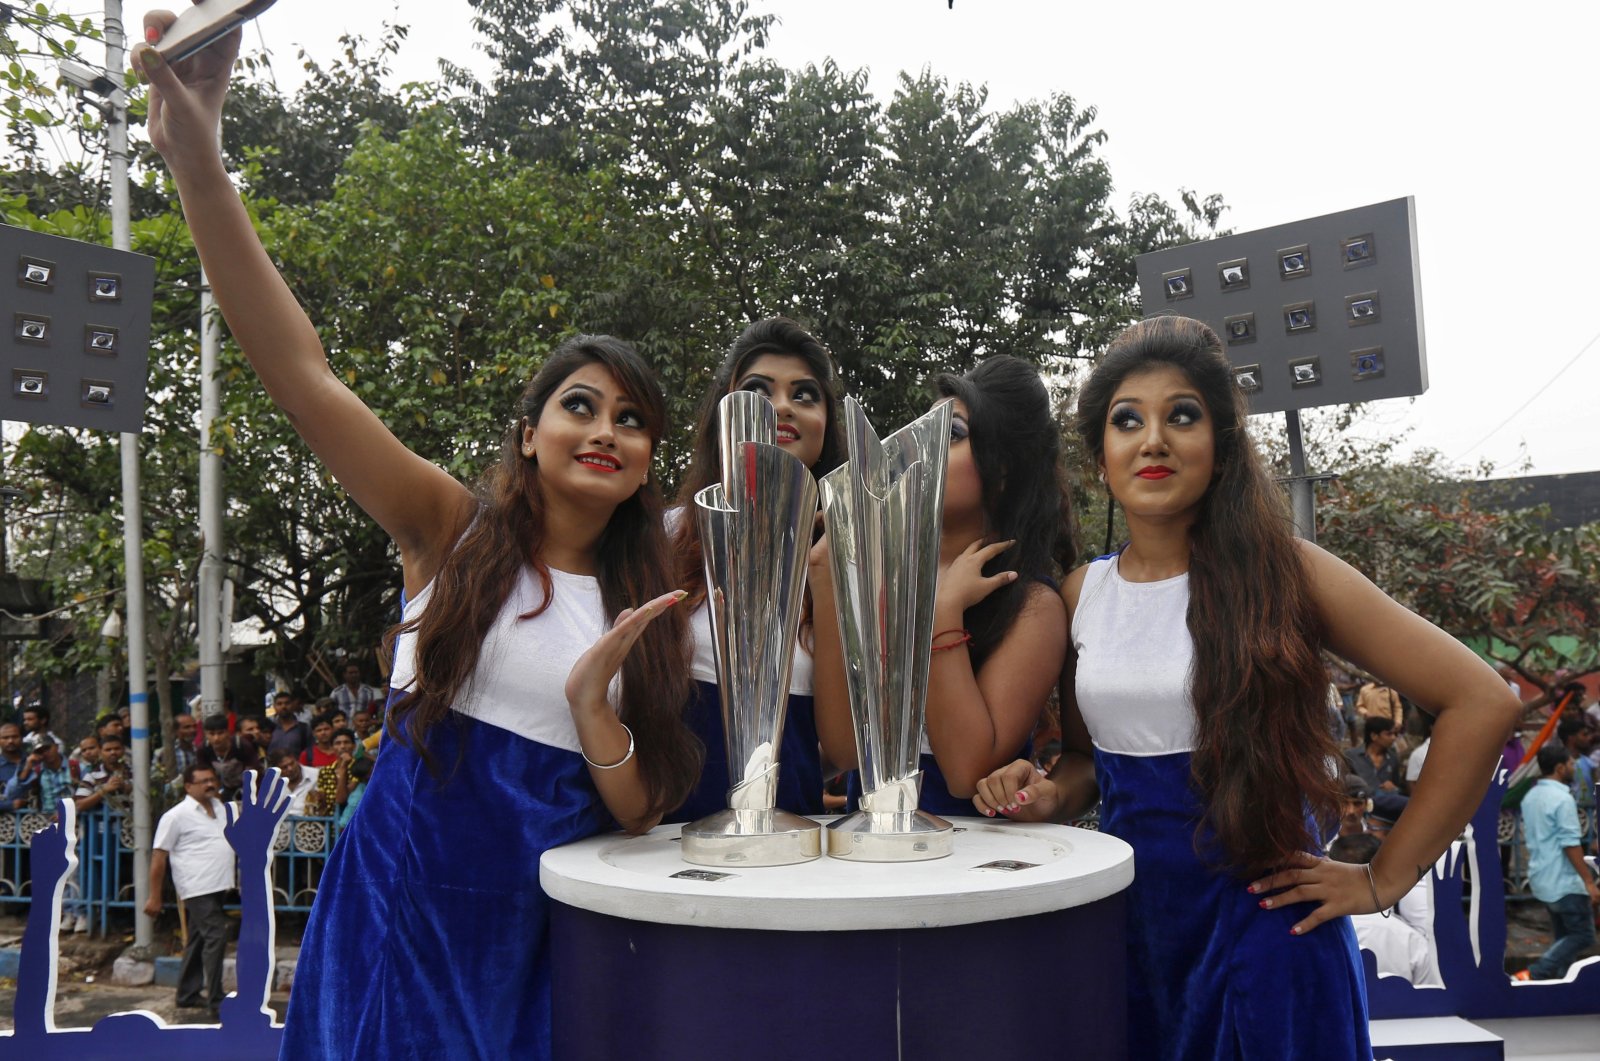 Models take a selfie next to the World Twenty20 trophies after they arrived in Kolkata, India, Feb. 24, 2016. (Reuters Photo)